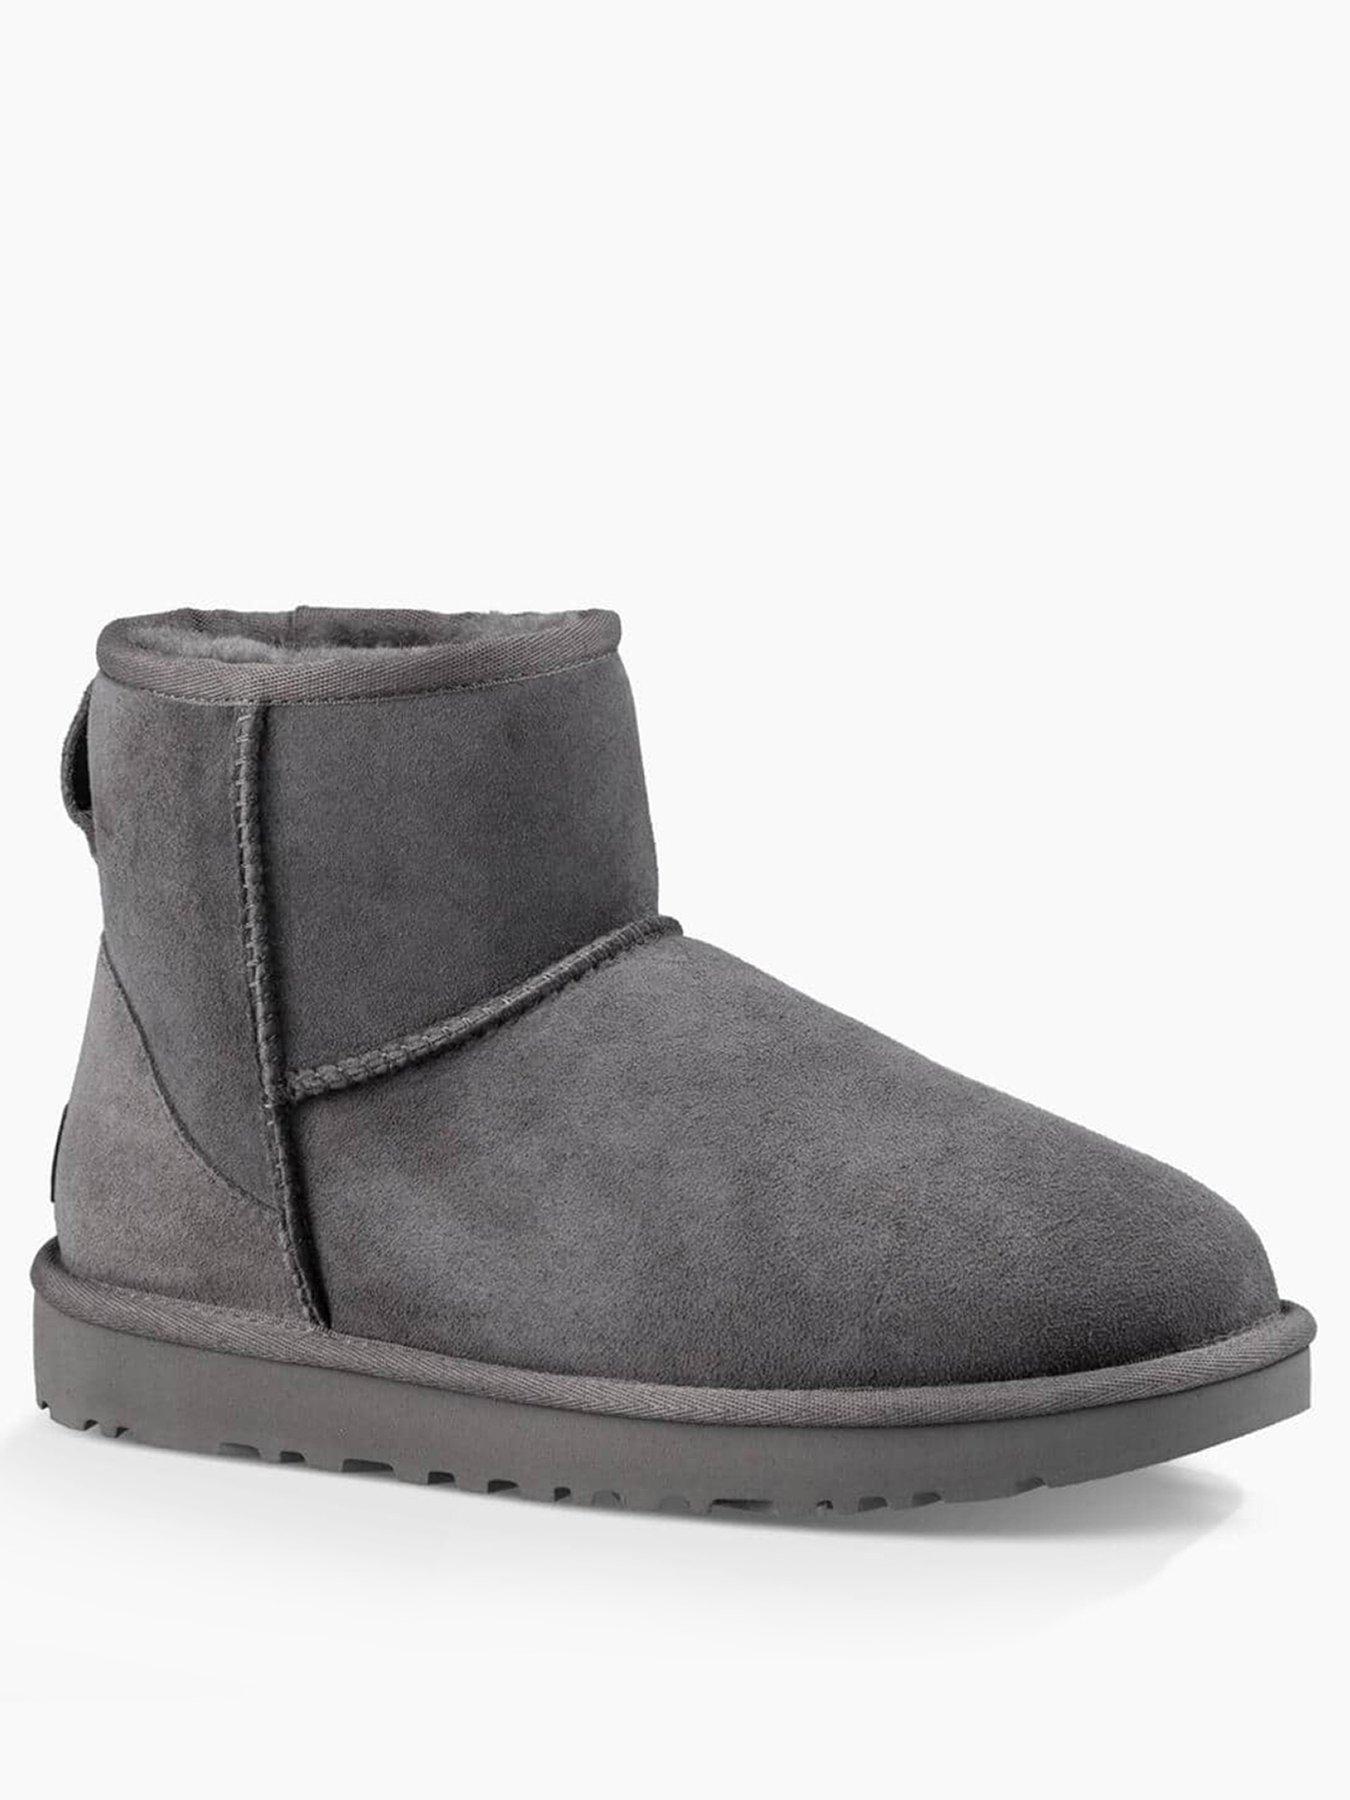 cheap uggs boots uk